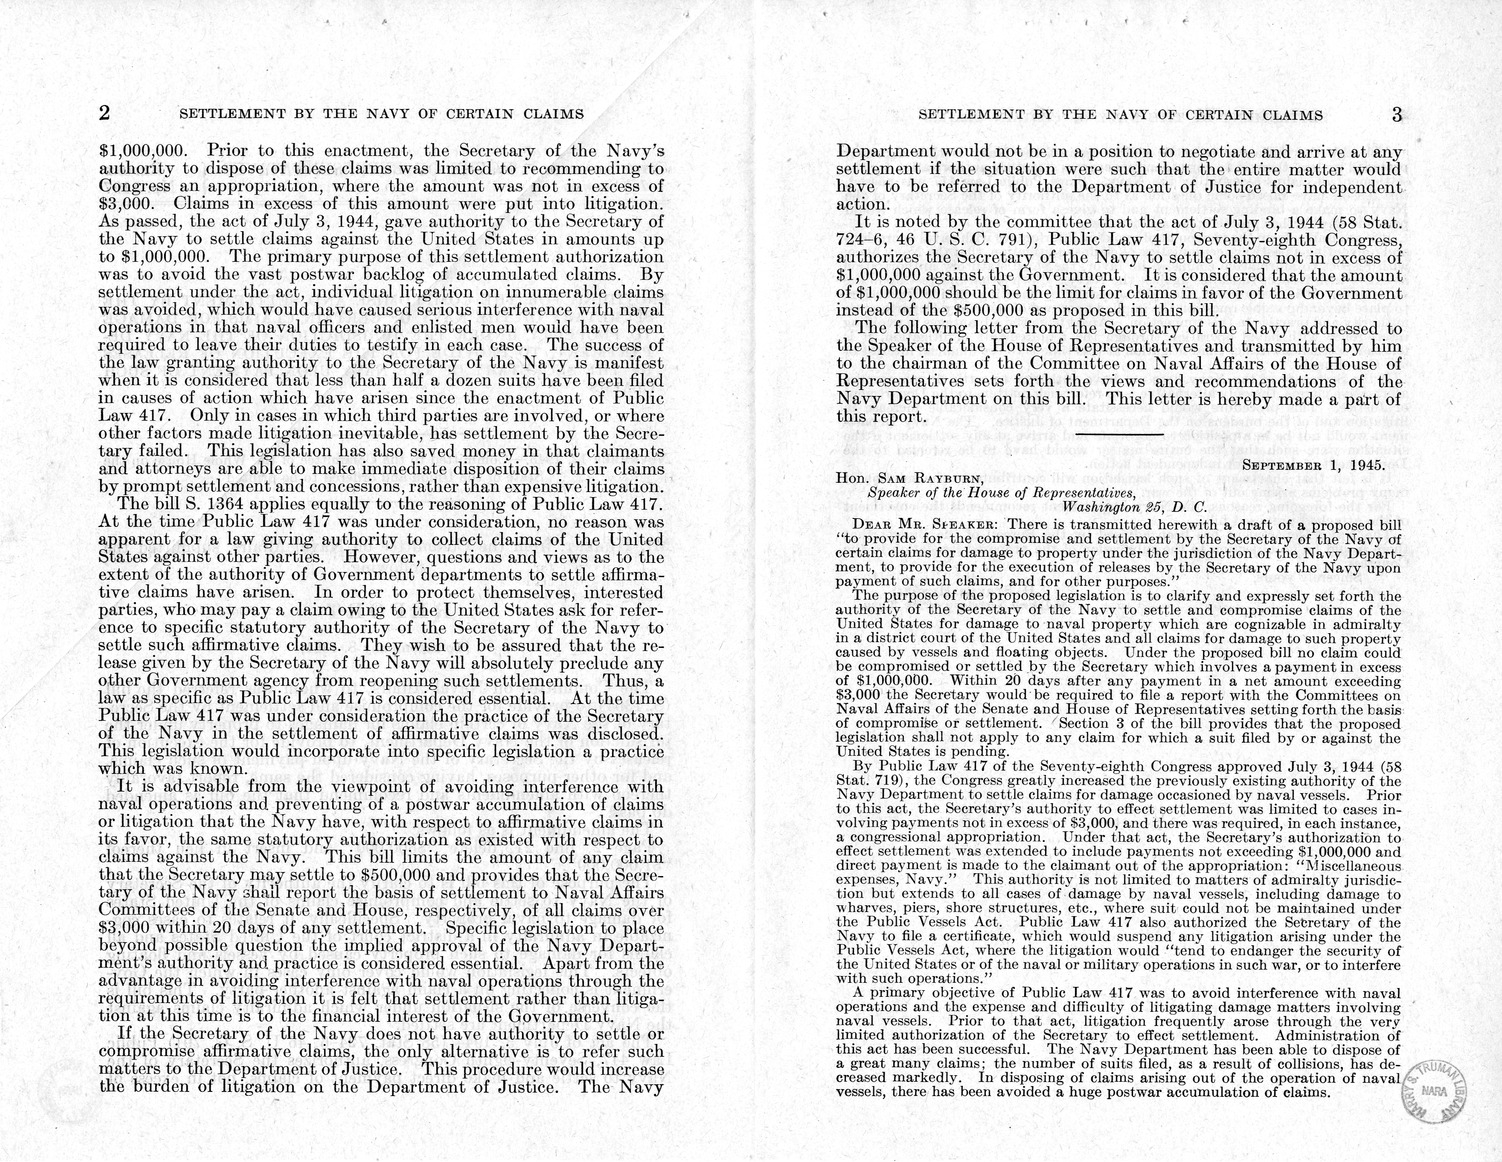 Memorandum from Harold D. Smith to M. C. Latta, S. 1364, To Provide for the Compromise and Settlement by the Secretary of the Navy of Certain Claims for Damage to Property Under the Jurisdiction of the Navy Department, to Provide for the Execution of Releases by the Secretary of the Navy Upon Payment of Such Claims, with Attachments